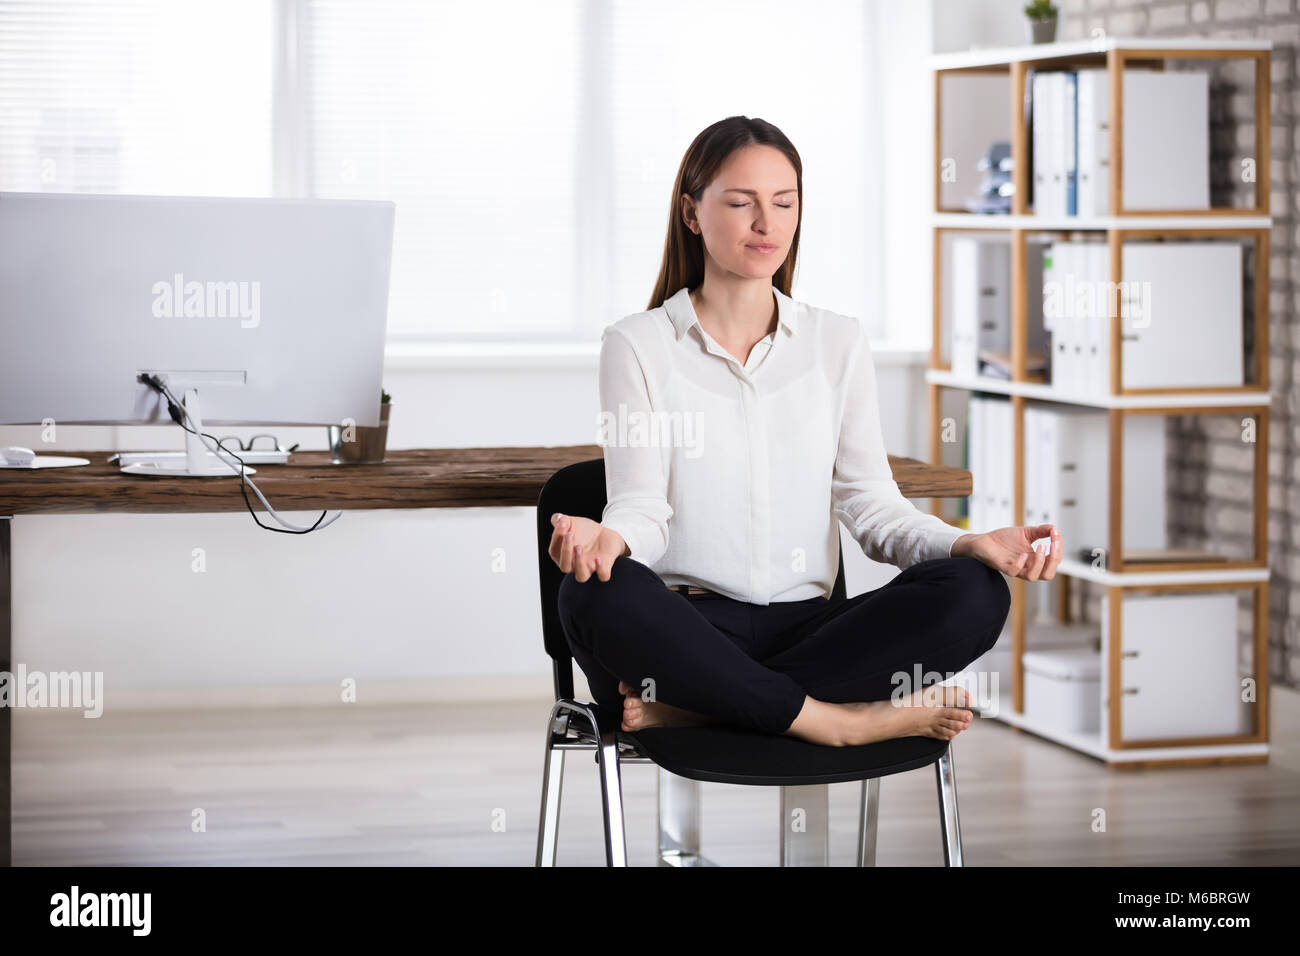 Young Businesswoman Sitting On Chair Doing Meditation Stock Photo